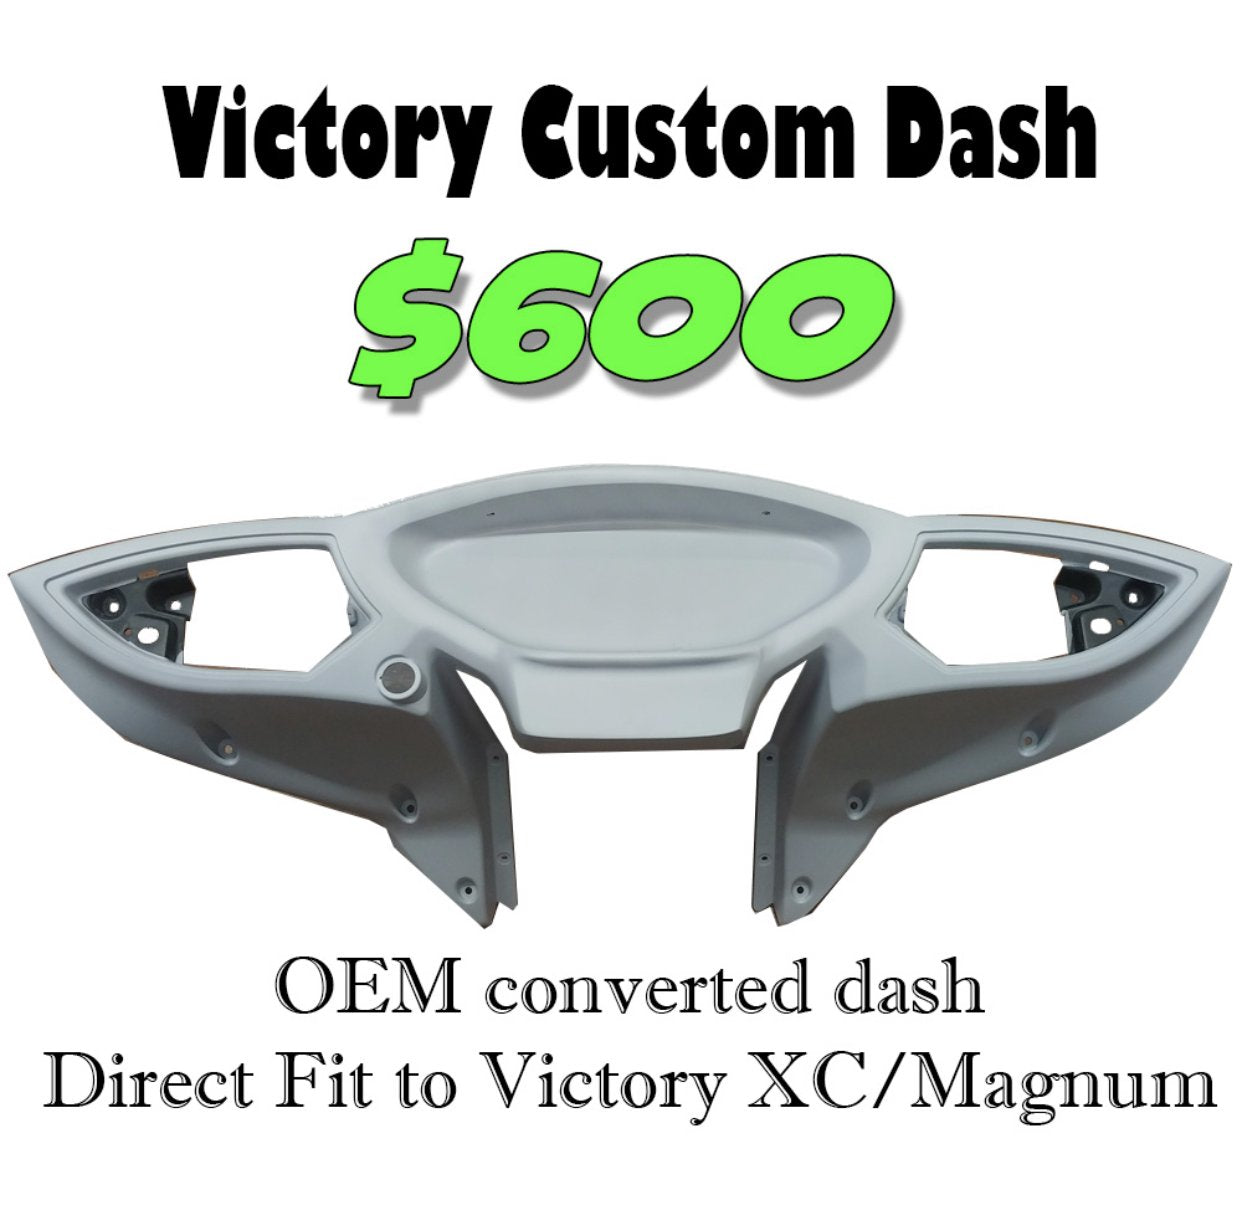 Victory Front Fairing - The "Cross Country" Custom Dash is Universal Fit for Direct OEM Replacement